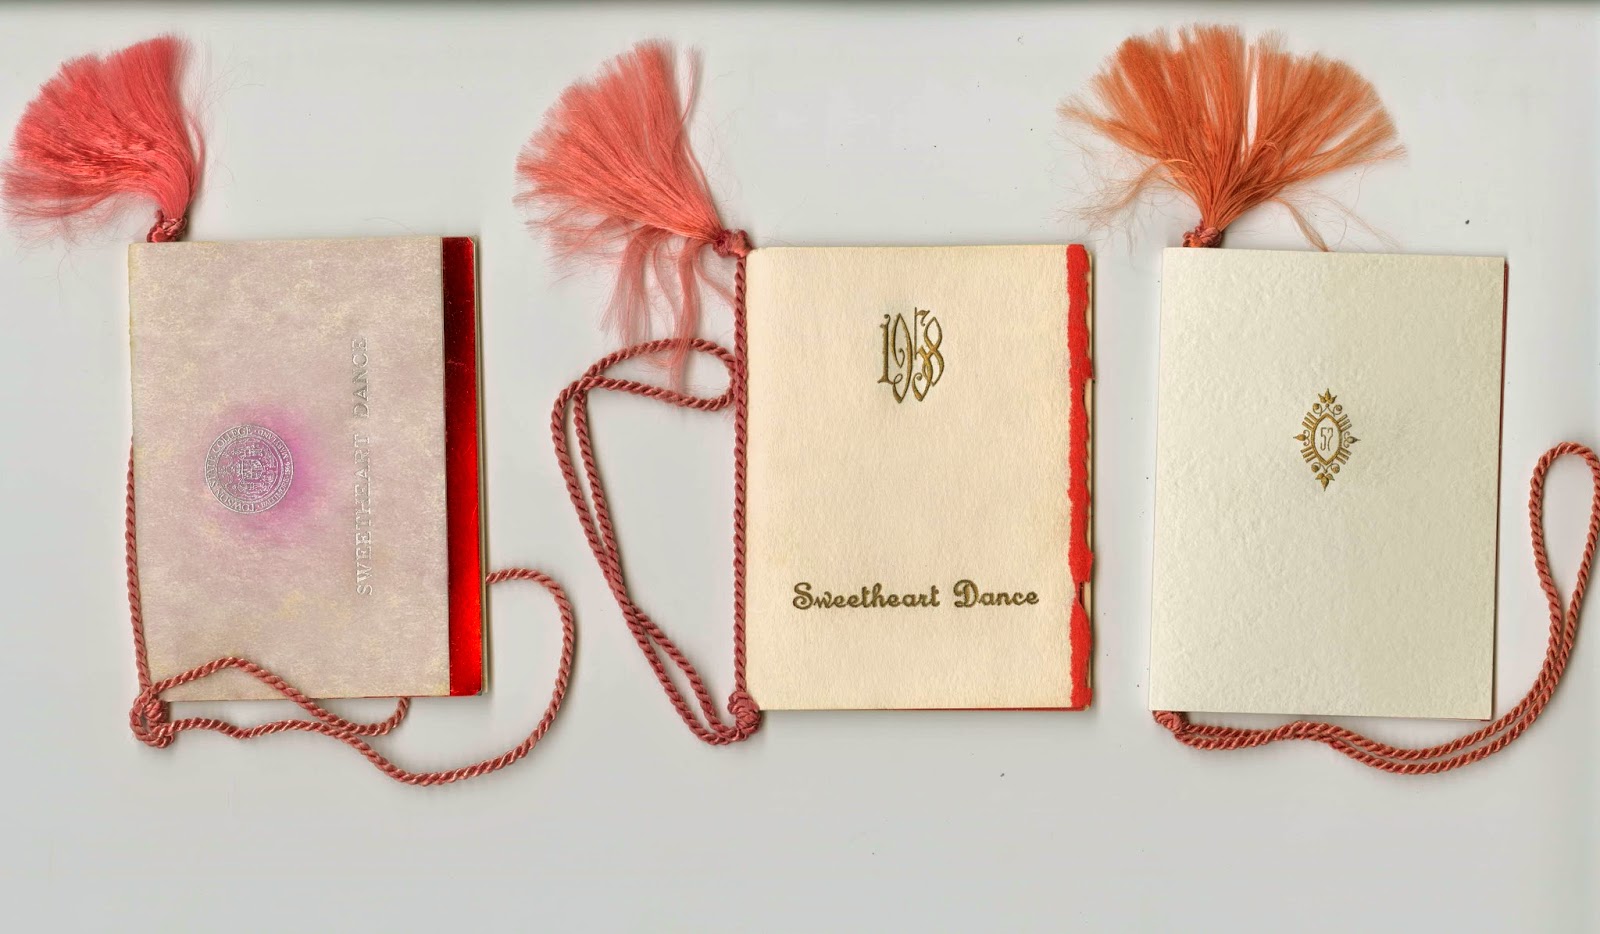 Three programs from the Sweetheart Dances, made with various white and red papers and red tassels.